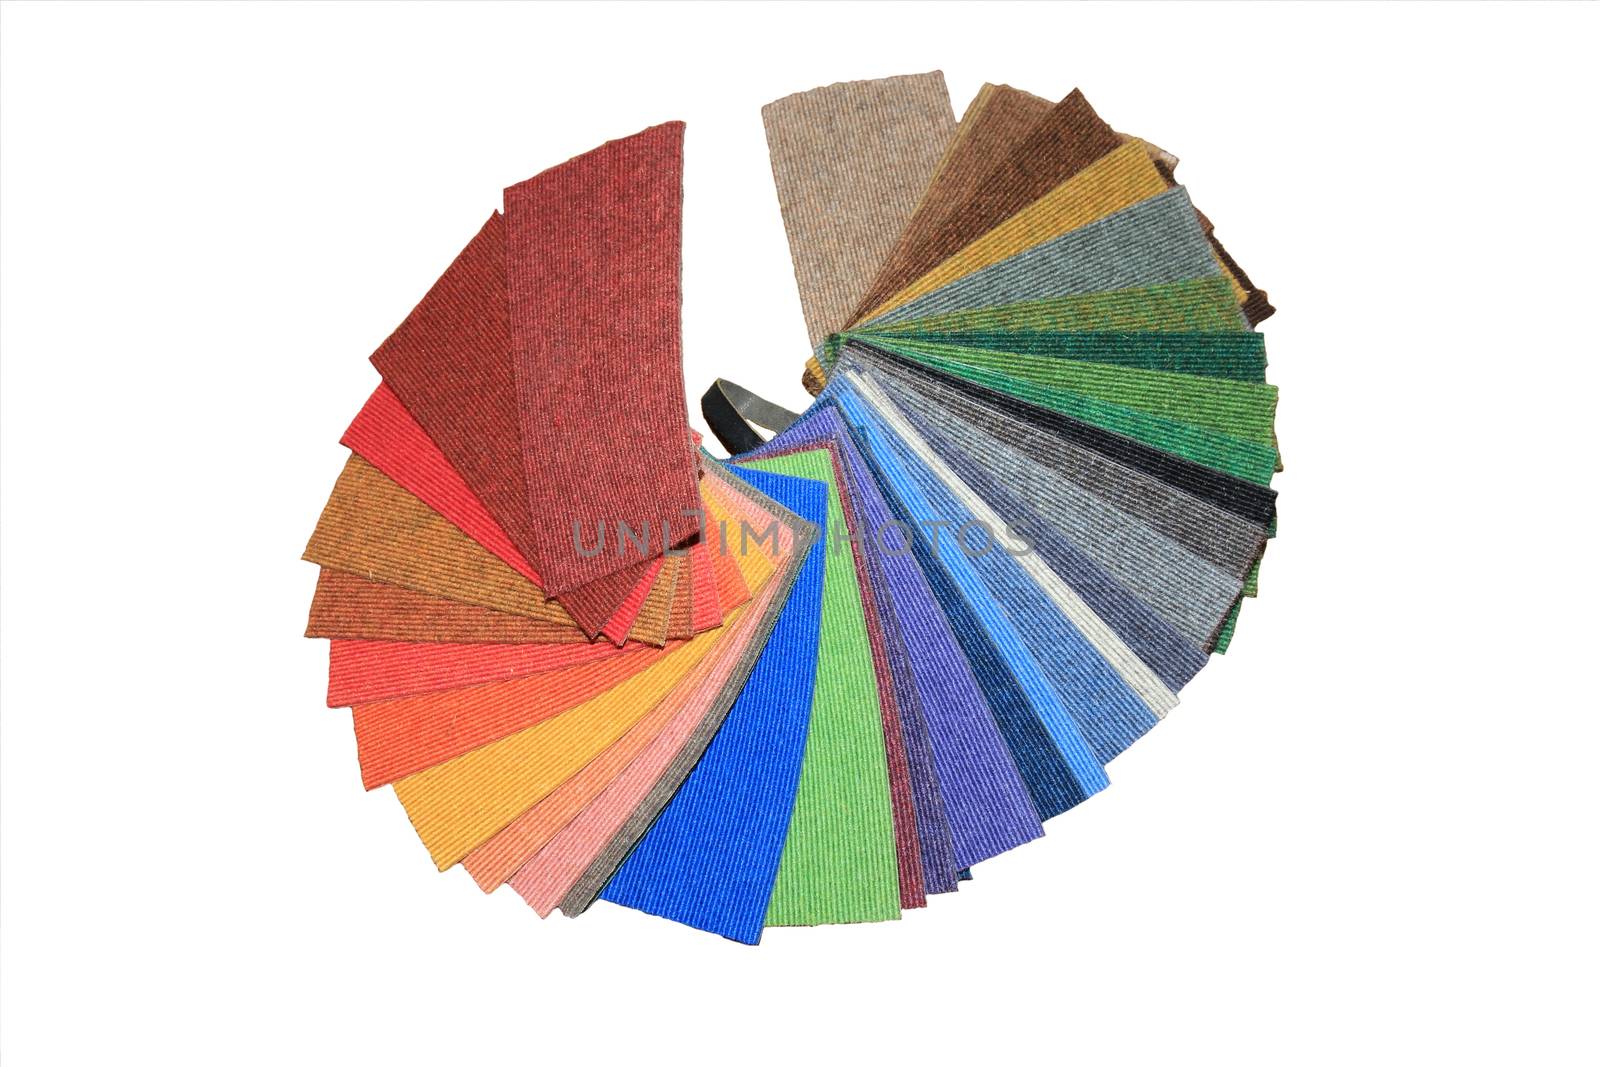 Carpet swatches in an interior decoration shop